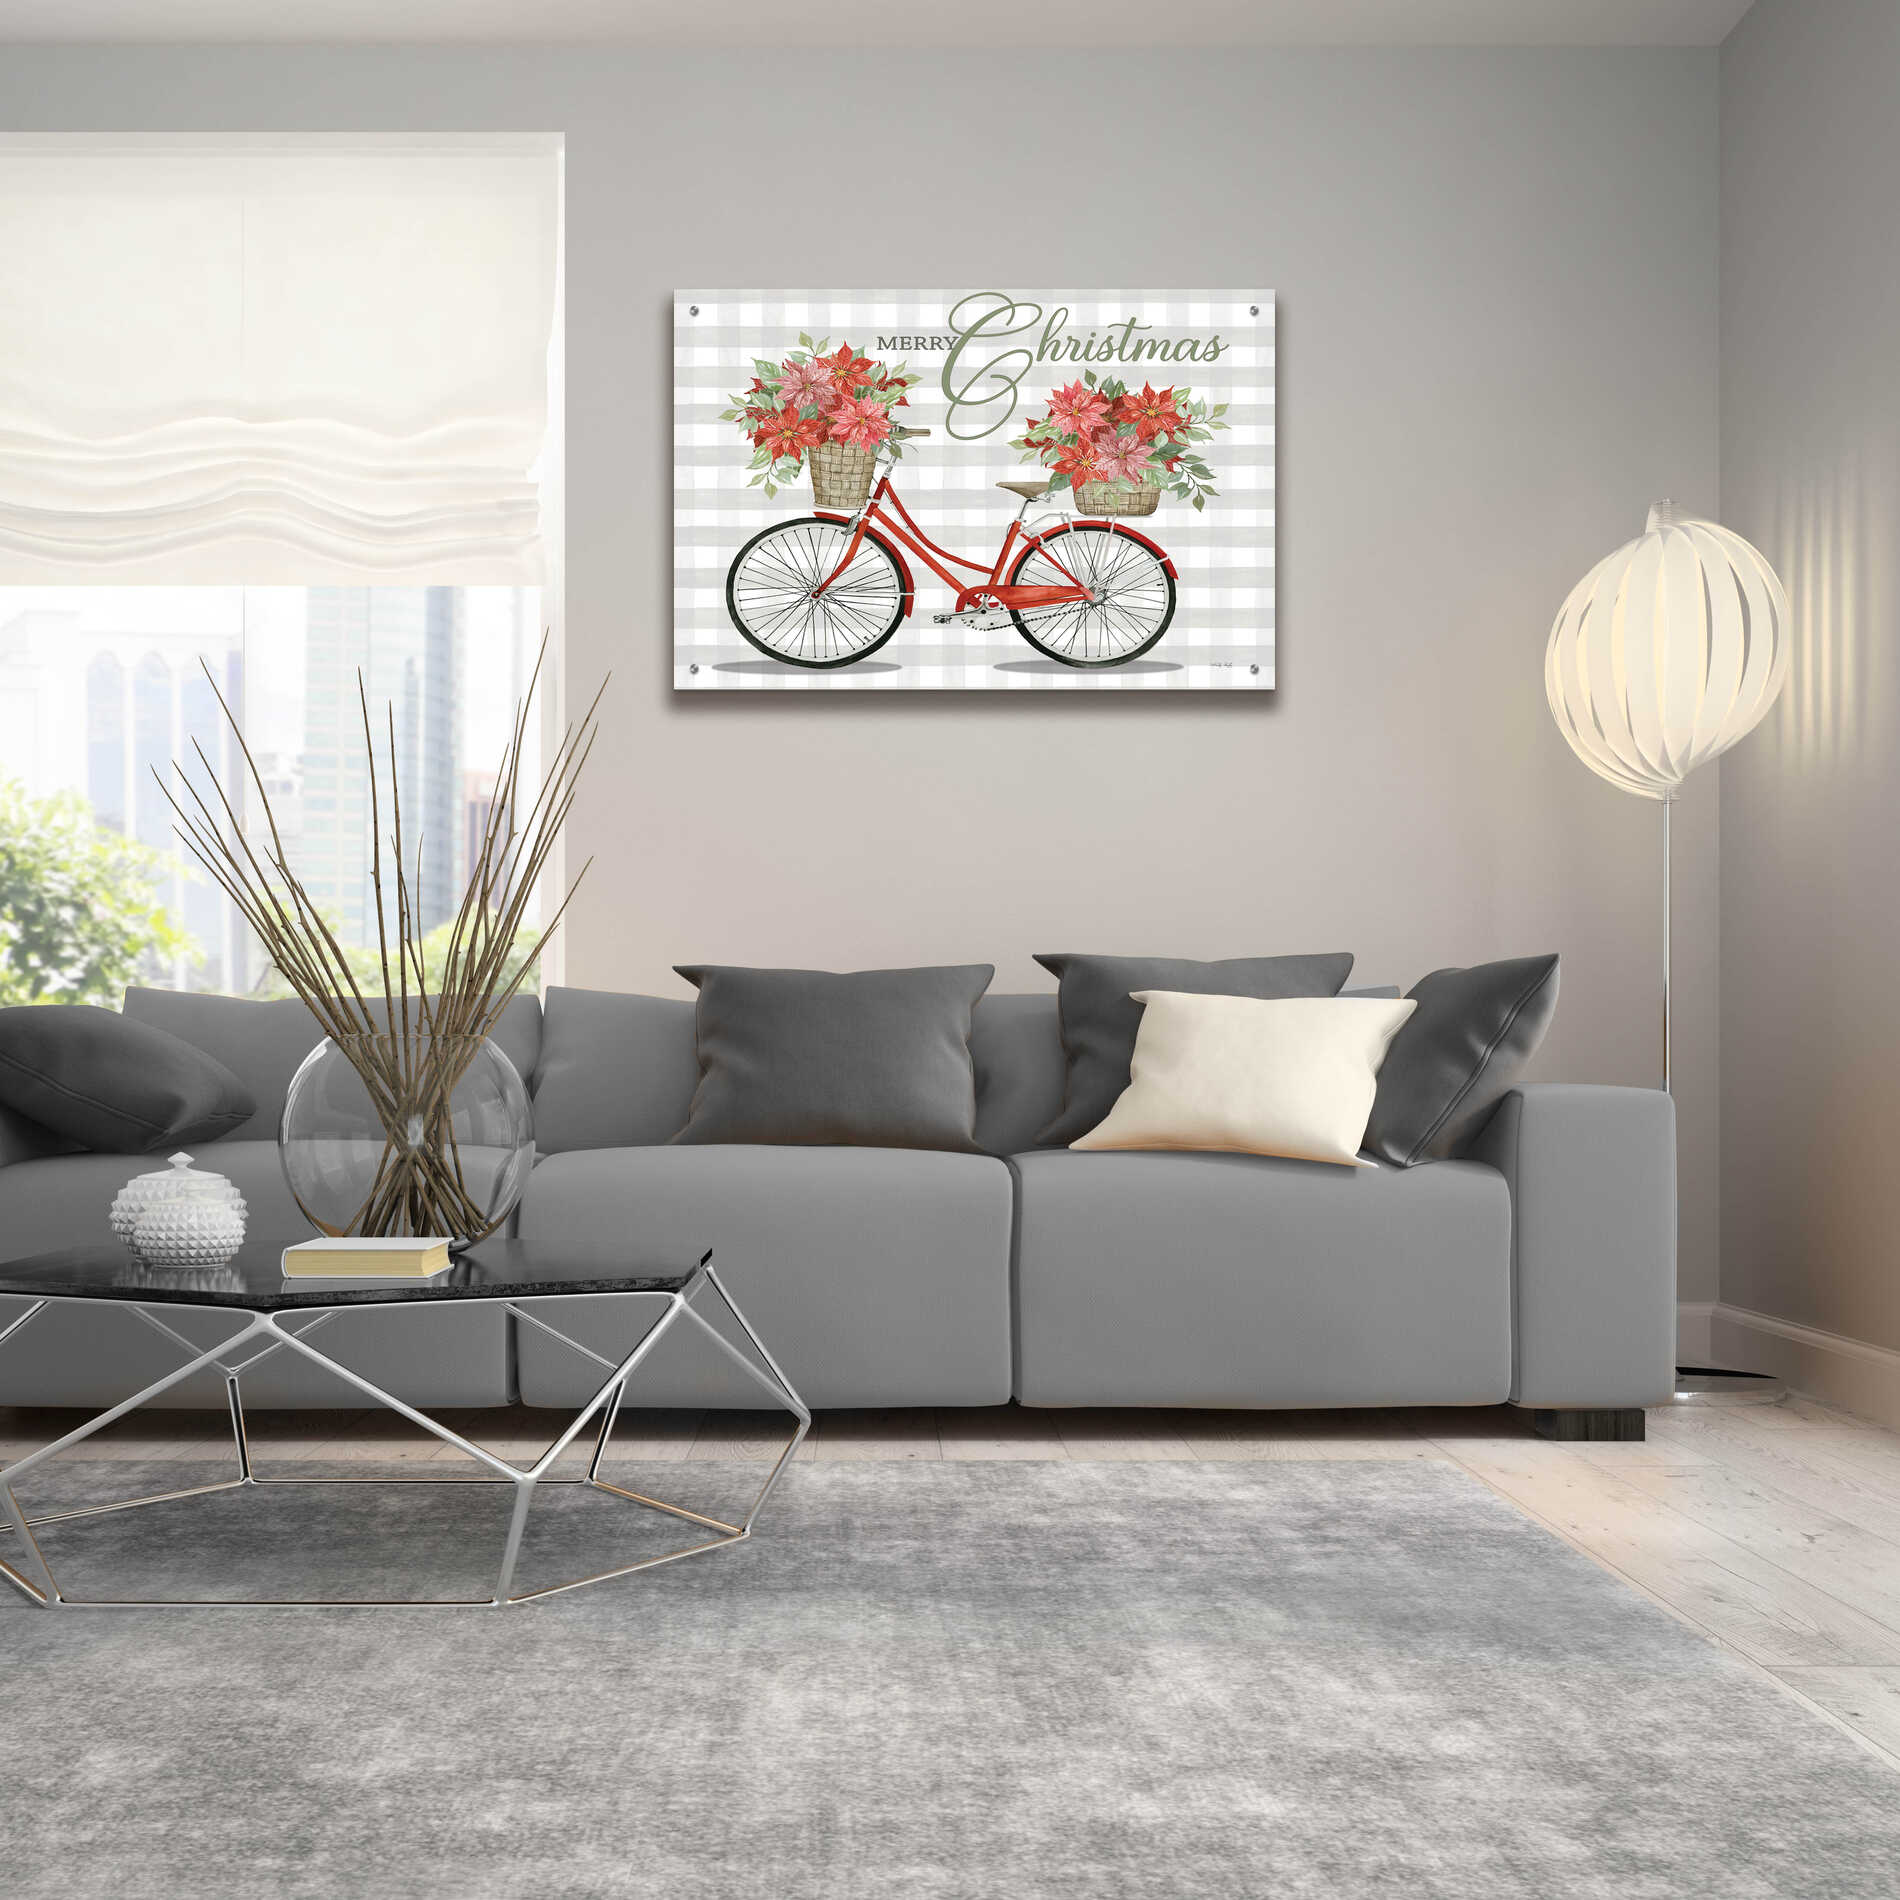 Epic Art 'Merry Christmas Bicycle I' by Cindy Jacobs, Acrylic Glass Wall Art,36x24